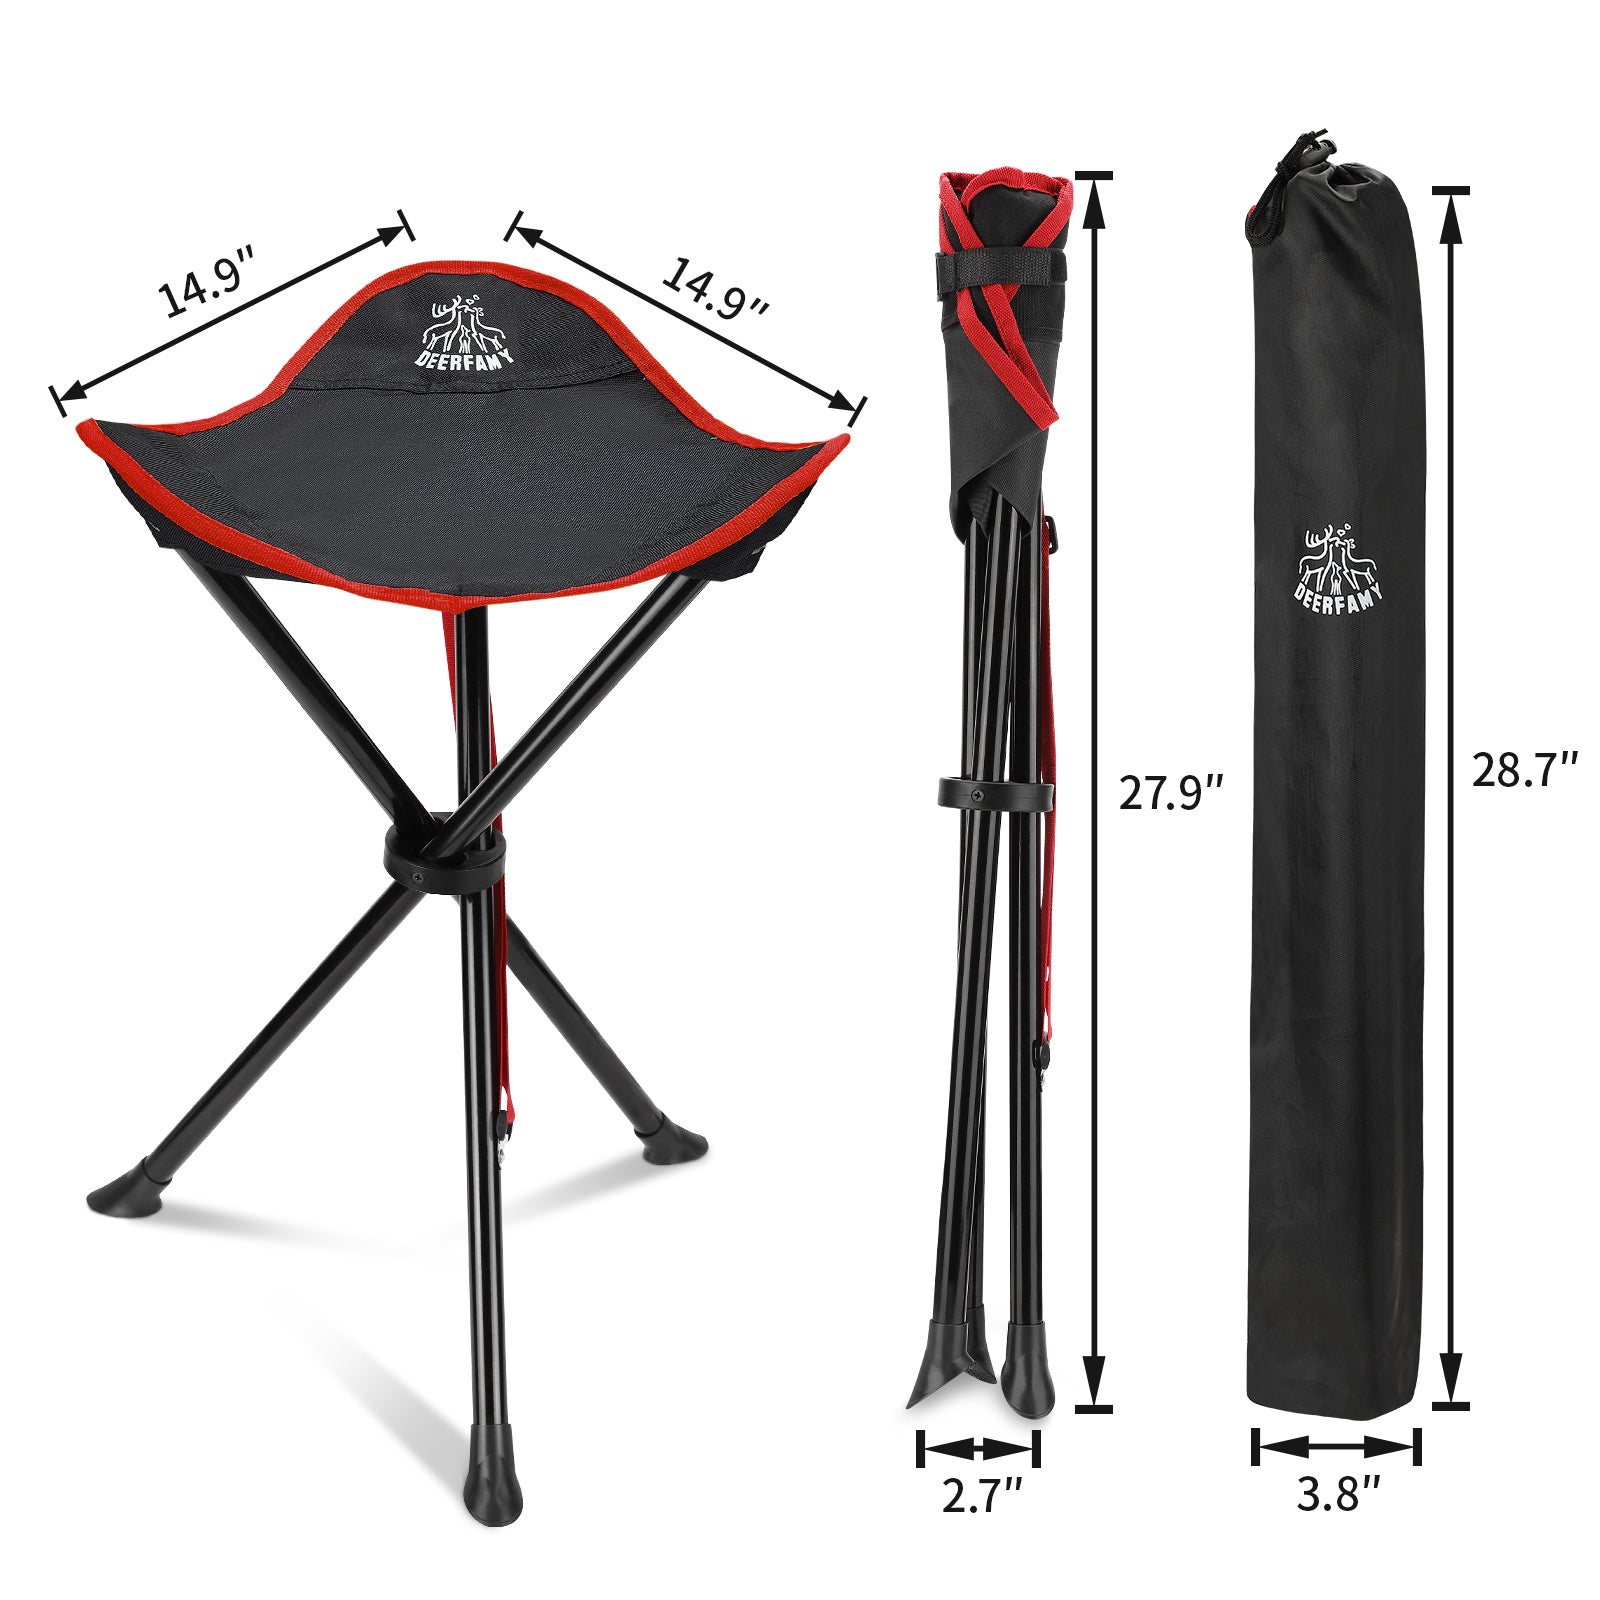 DEERFAMY Camping Stool 3 Legged Hold up to 225lbs Portable Tripod Seat